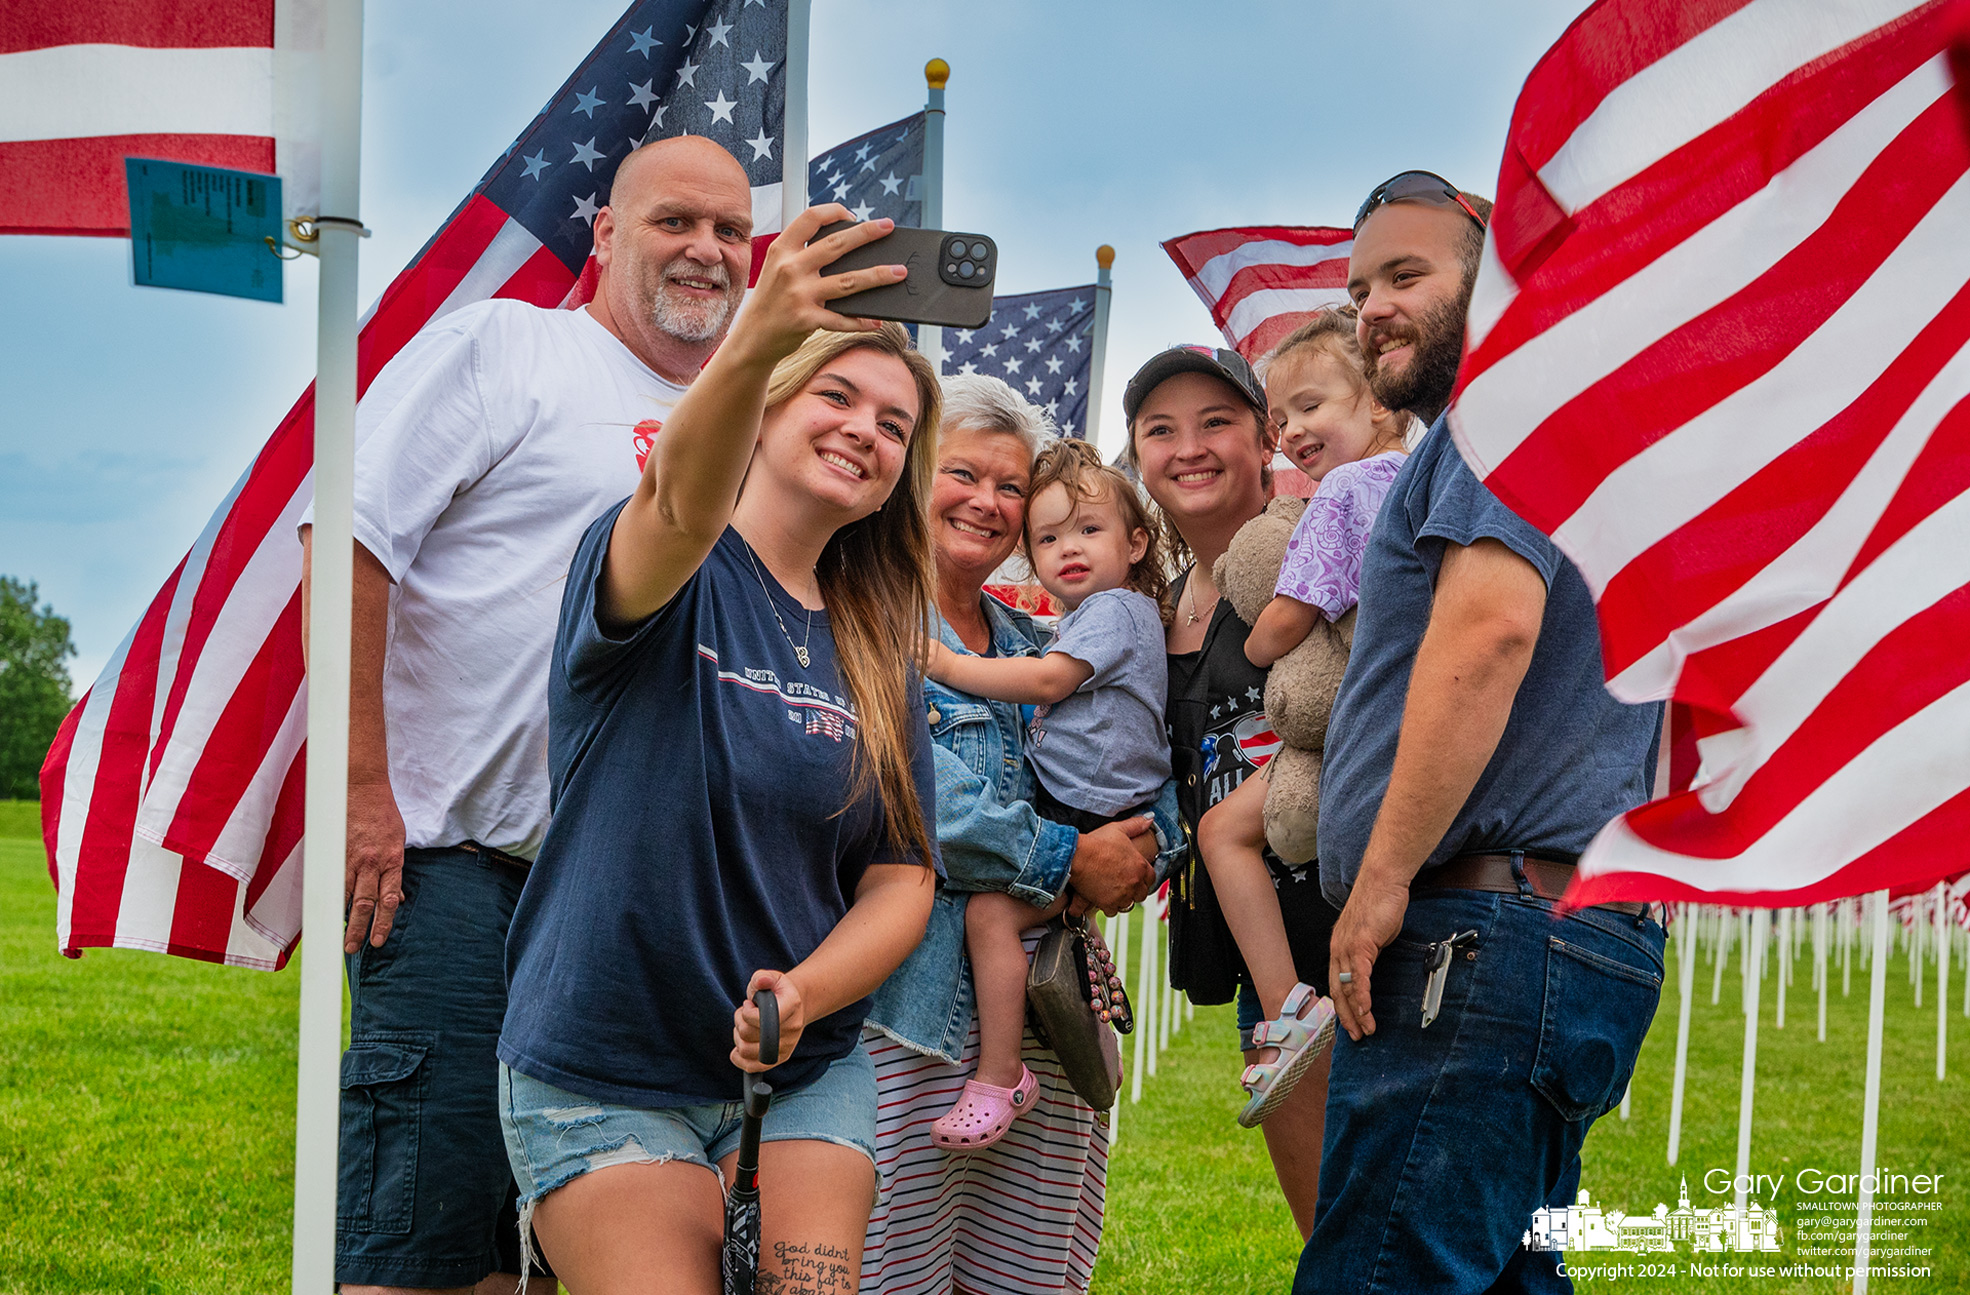 A family poses for a group photo at the flag dedicated at Field of Heroes in Westerville dedicated to the man who is the family's father, grandfather, and great-grandfather. My Final Photo for May 26, 2024.